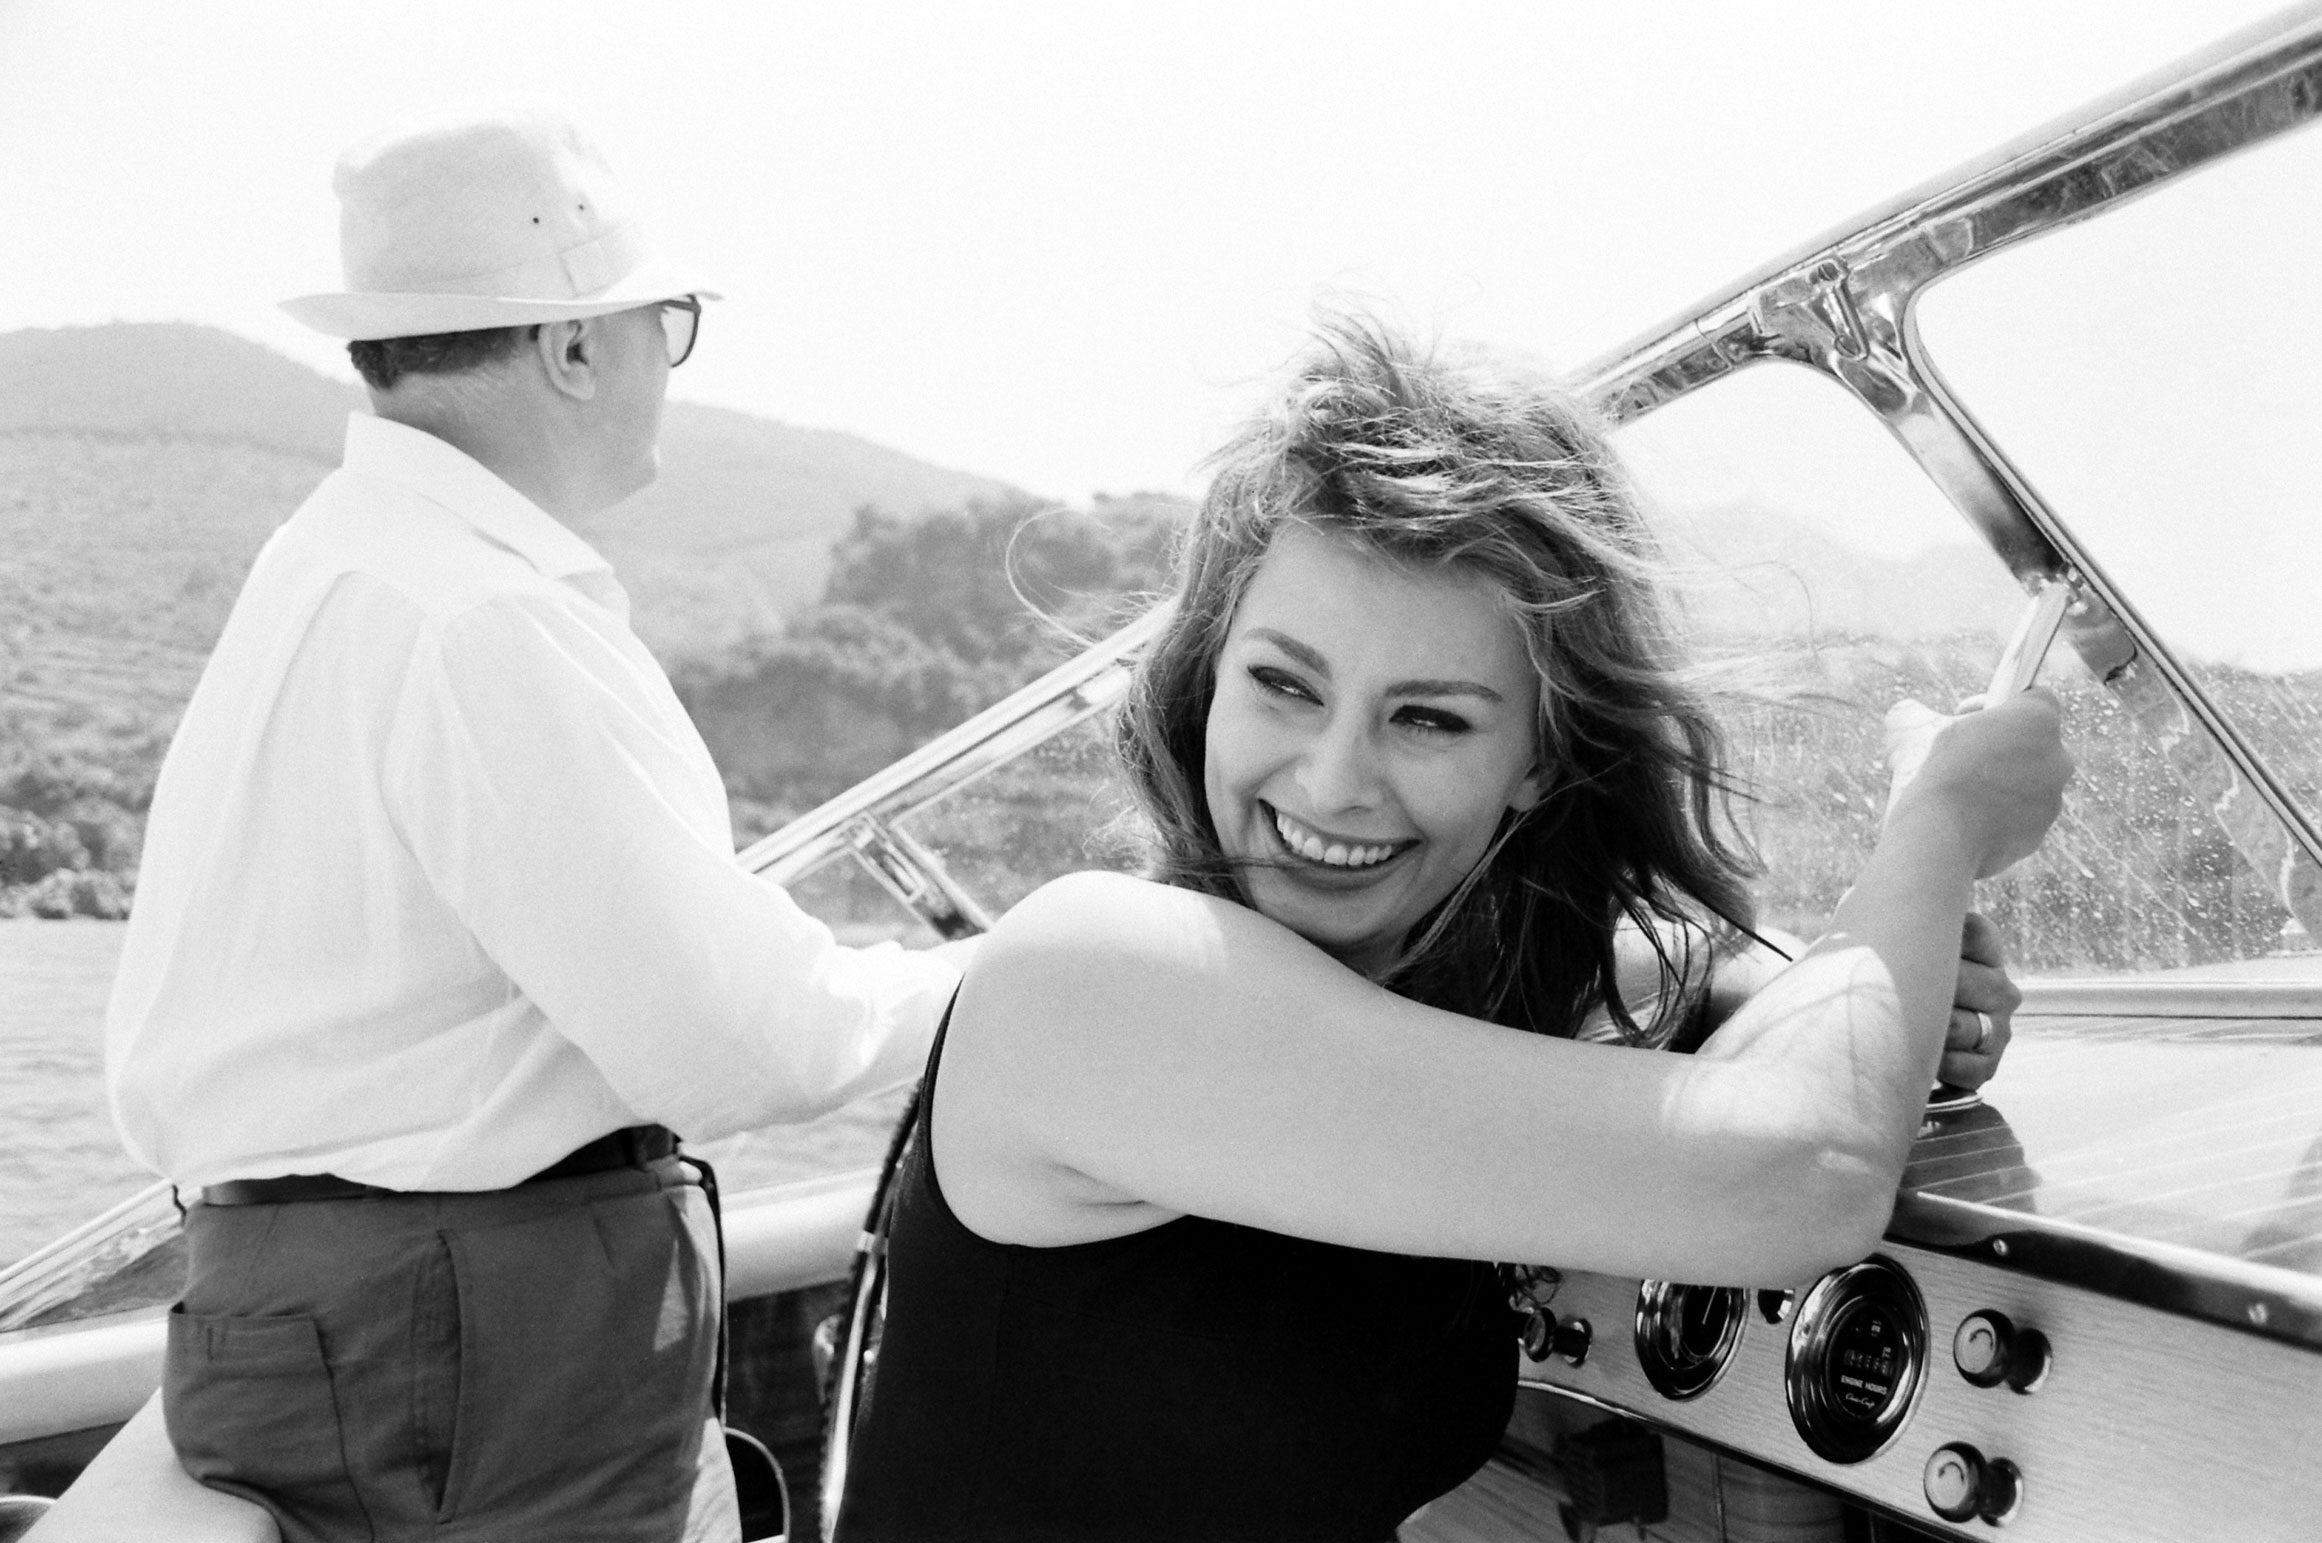 Sophia Loren with her husband Carlo Ponti on a boating trip off of Naples, 1961.